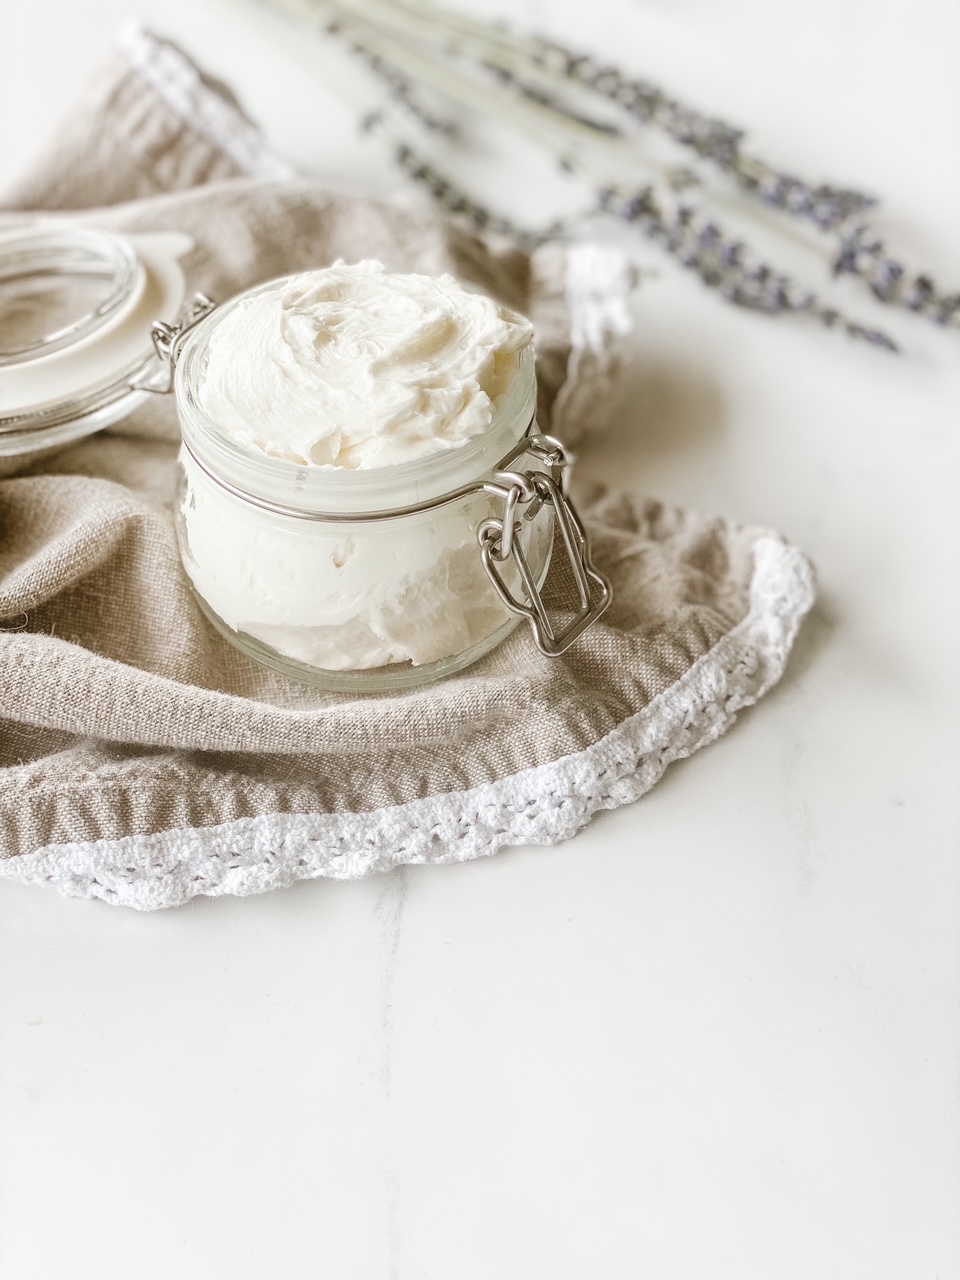 How To Make Natural Body Butter | DIY Body Butter